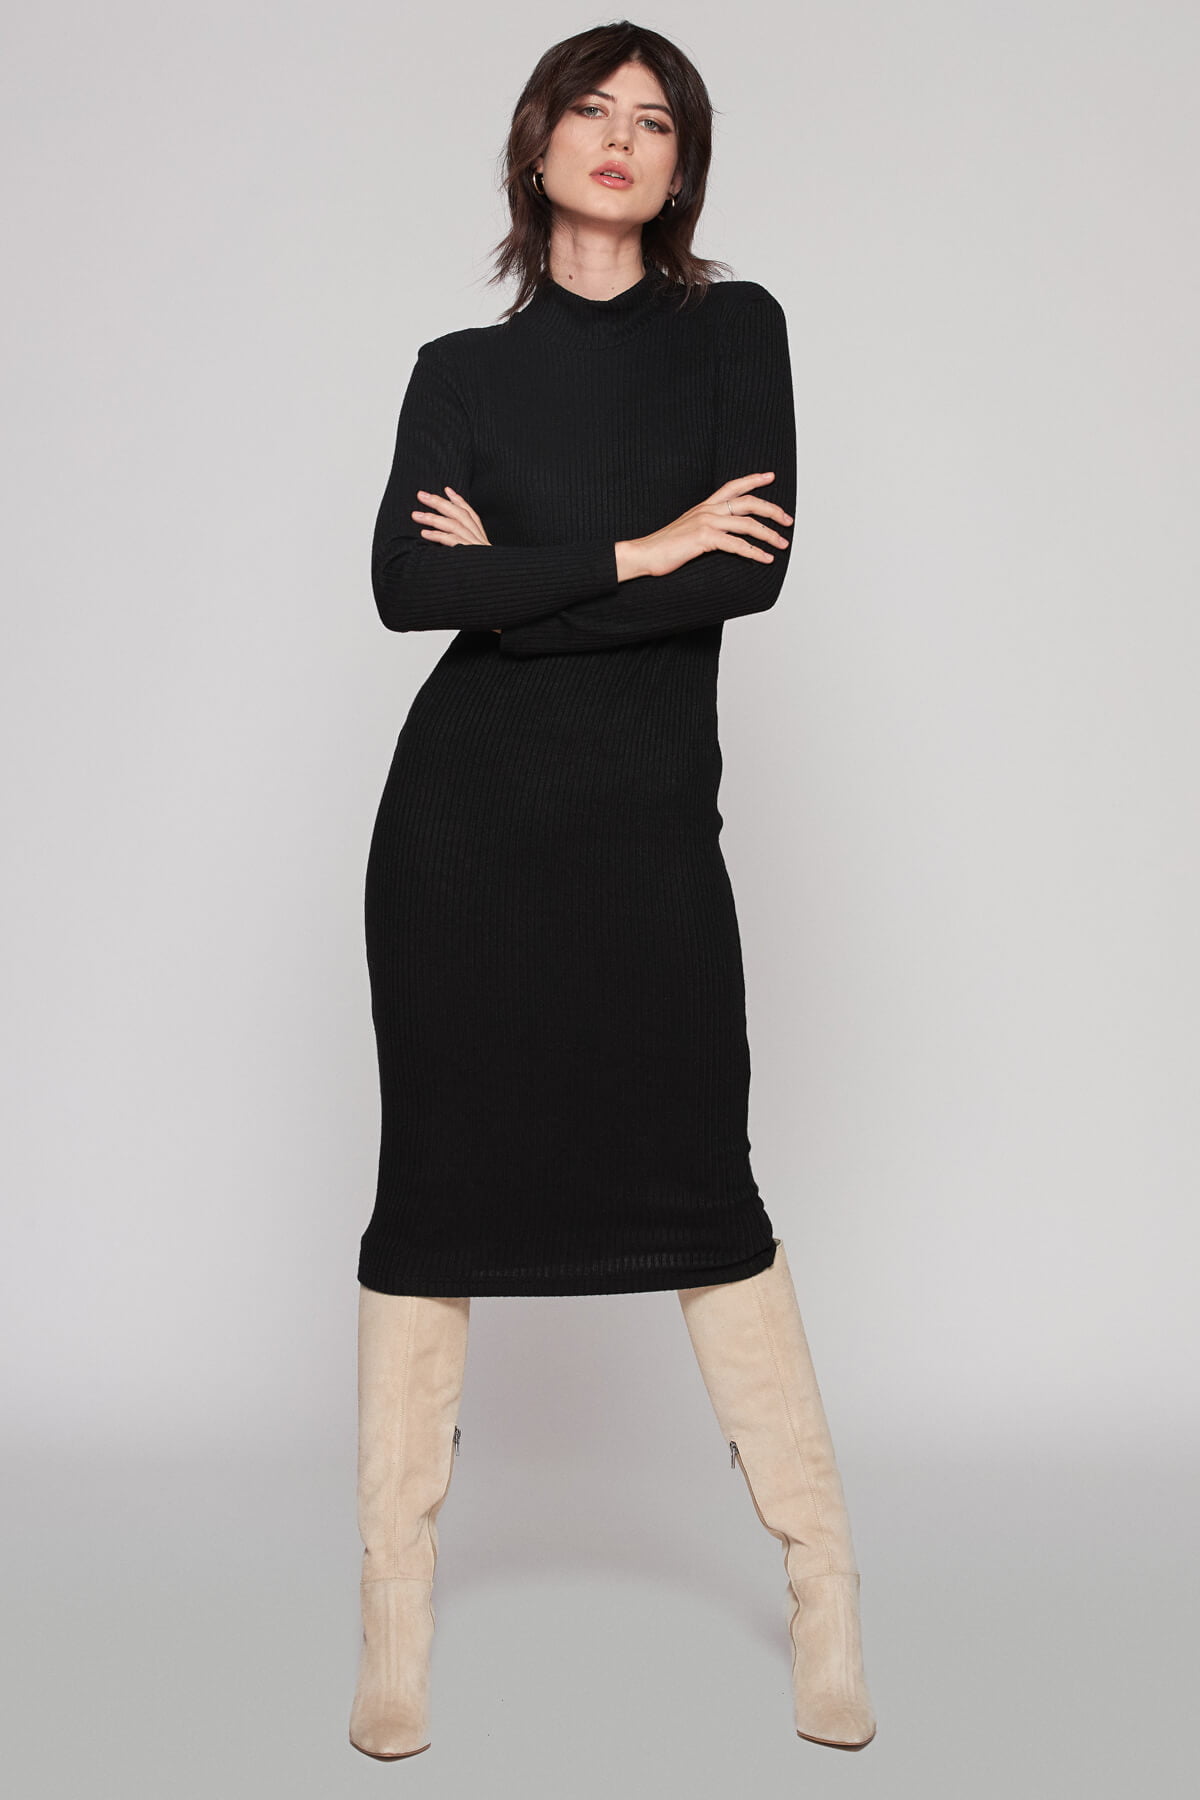 Body fitted stretchy knitwear dress perfect for layering every autumn outfit.